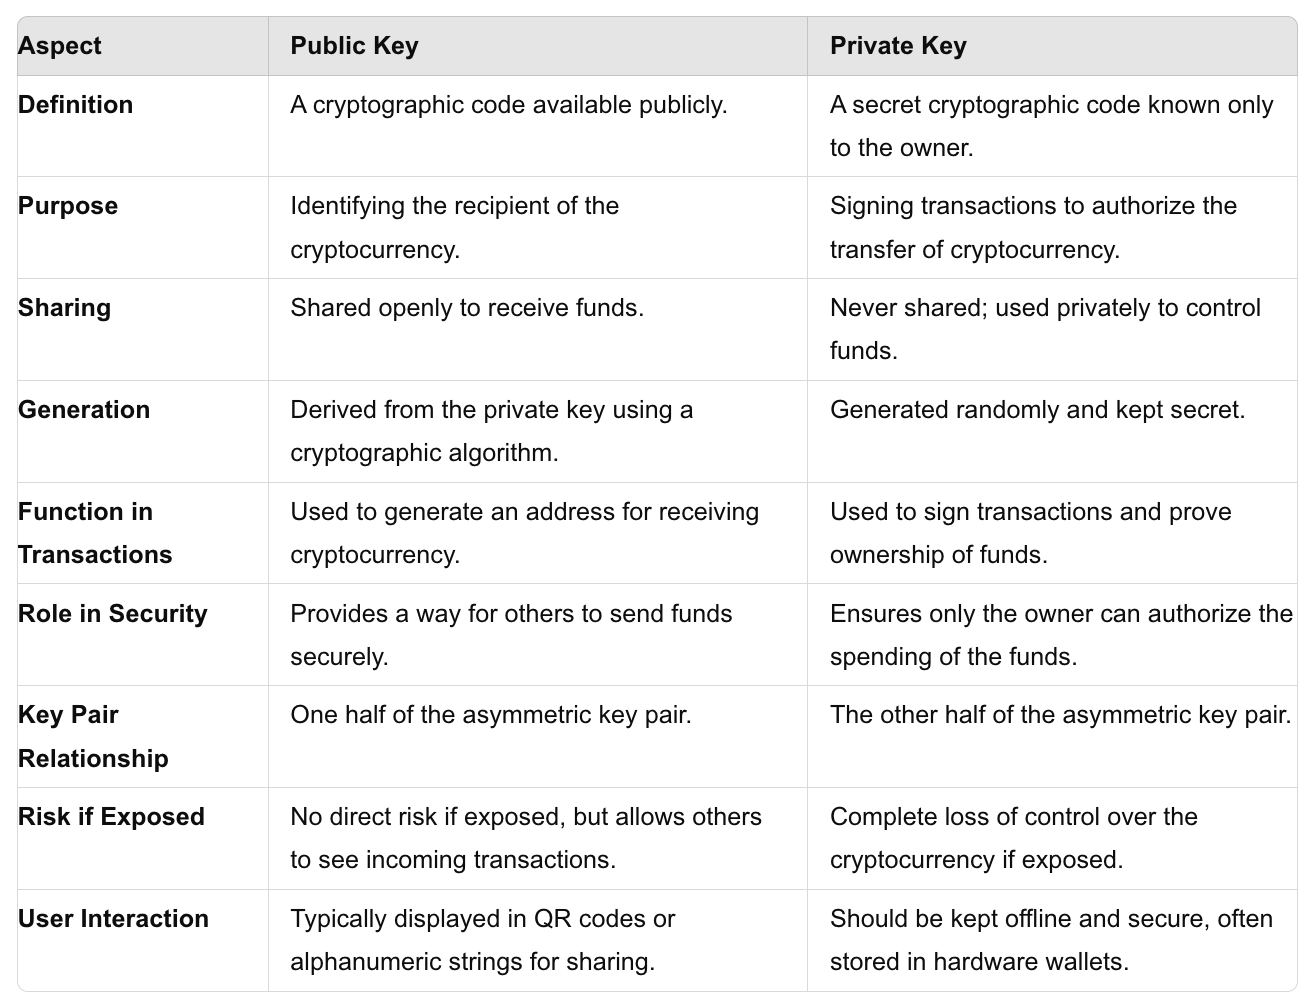 A table showing the differences between public keys and private keys